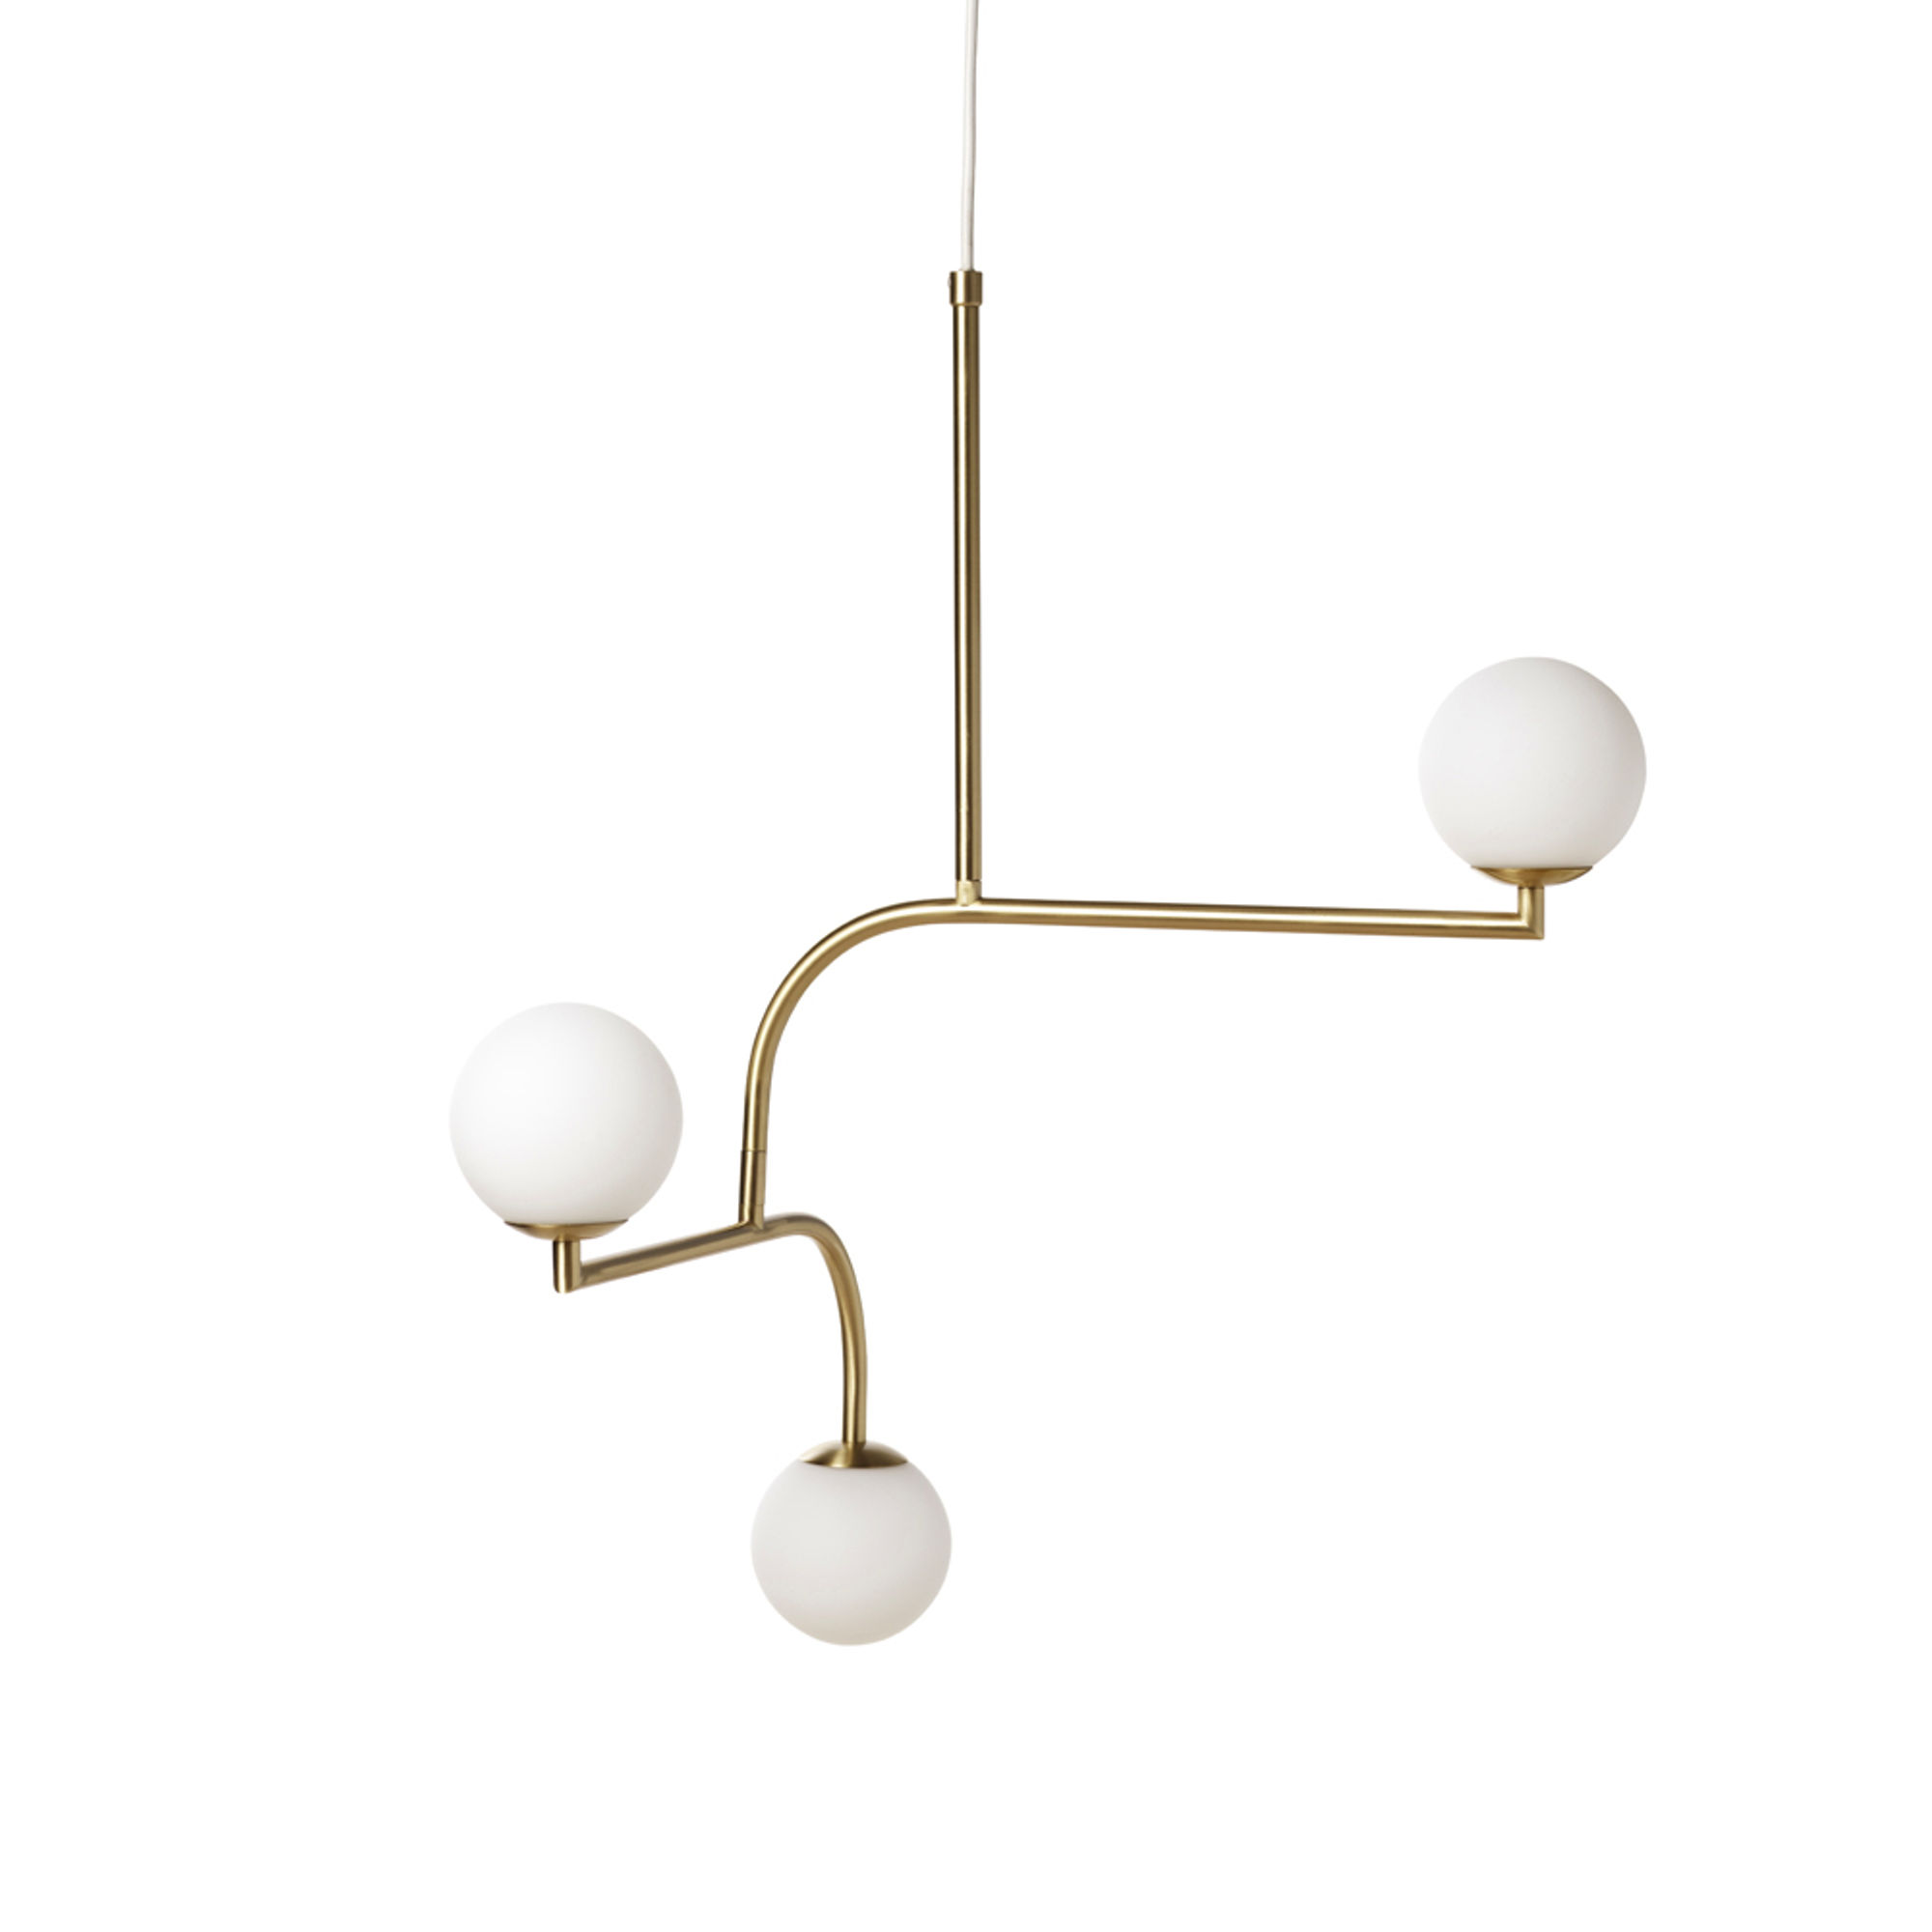 The Mobil 70 Pendant by Pholc 0